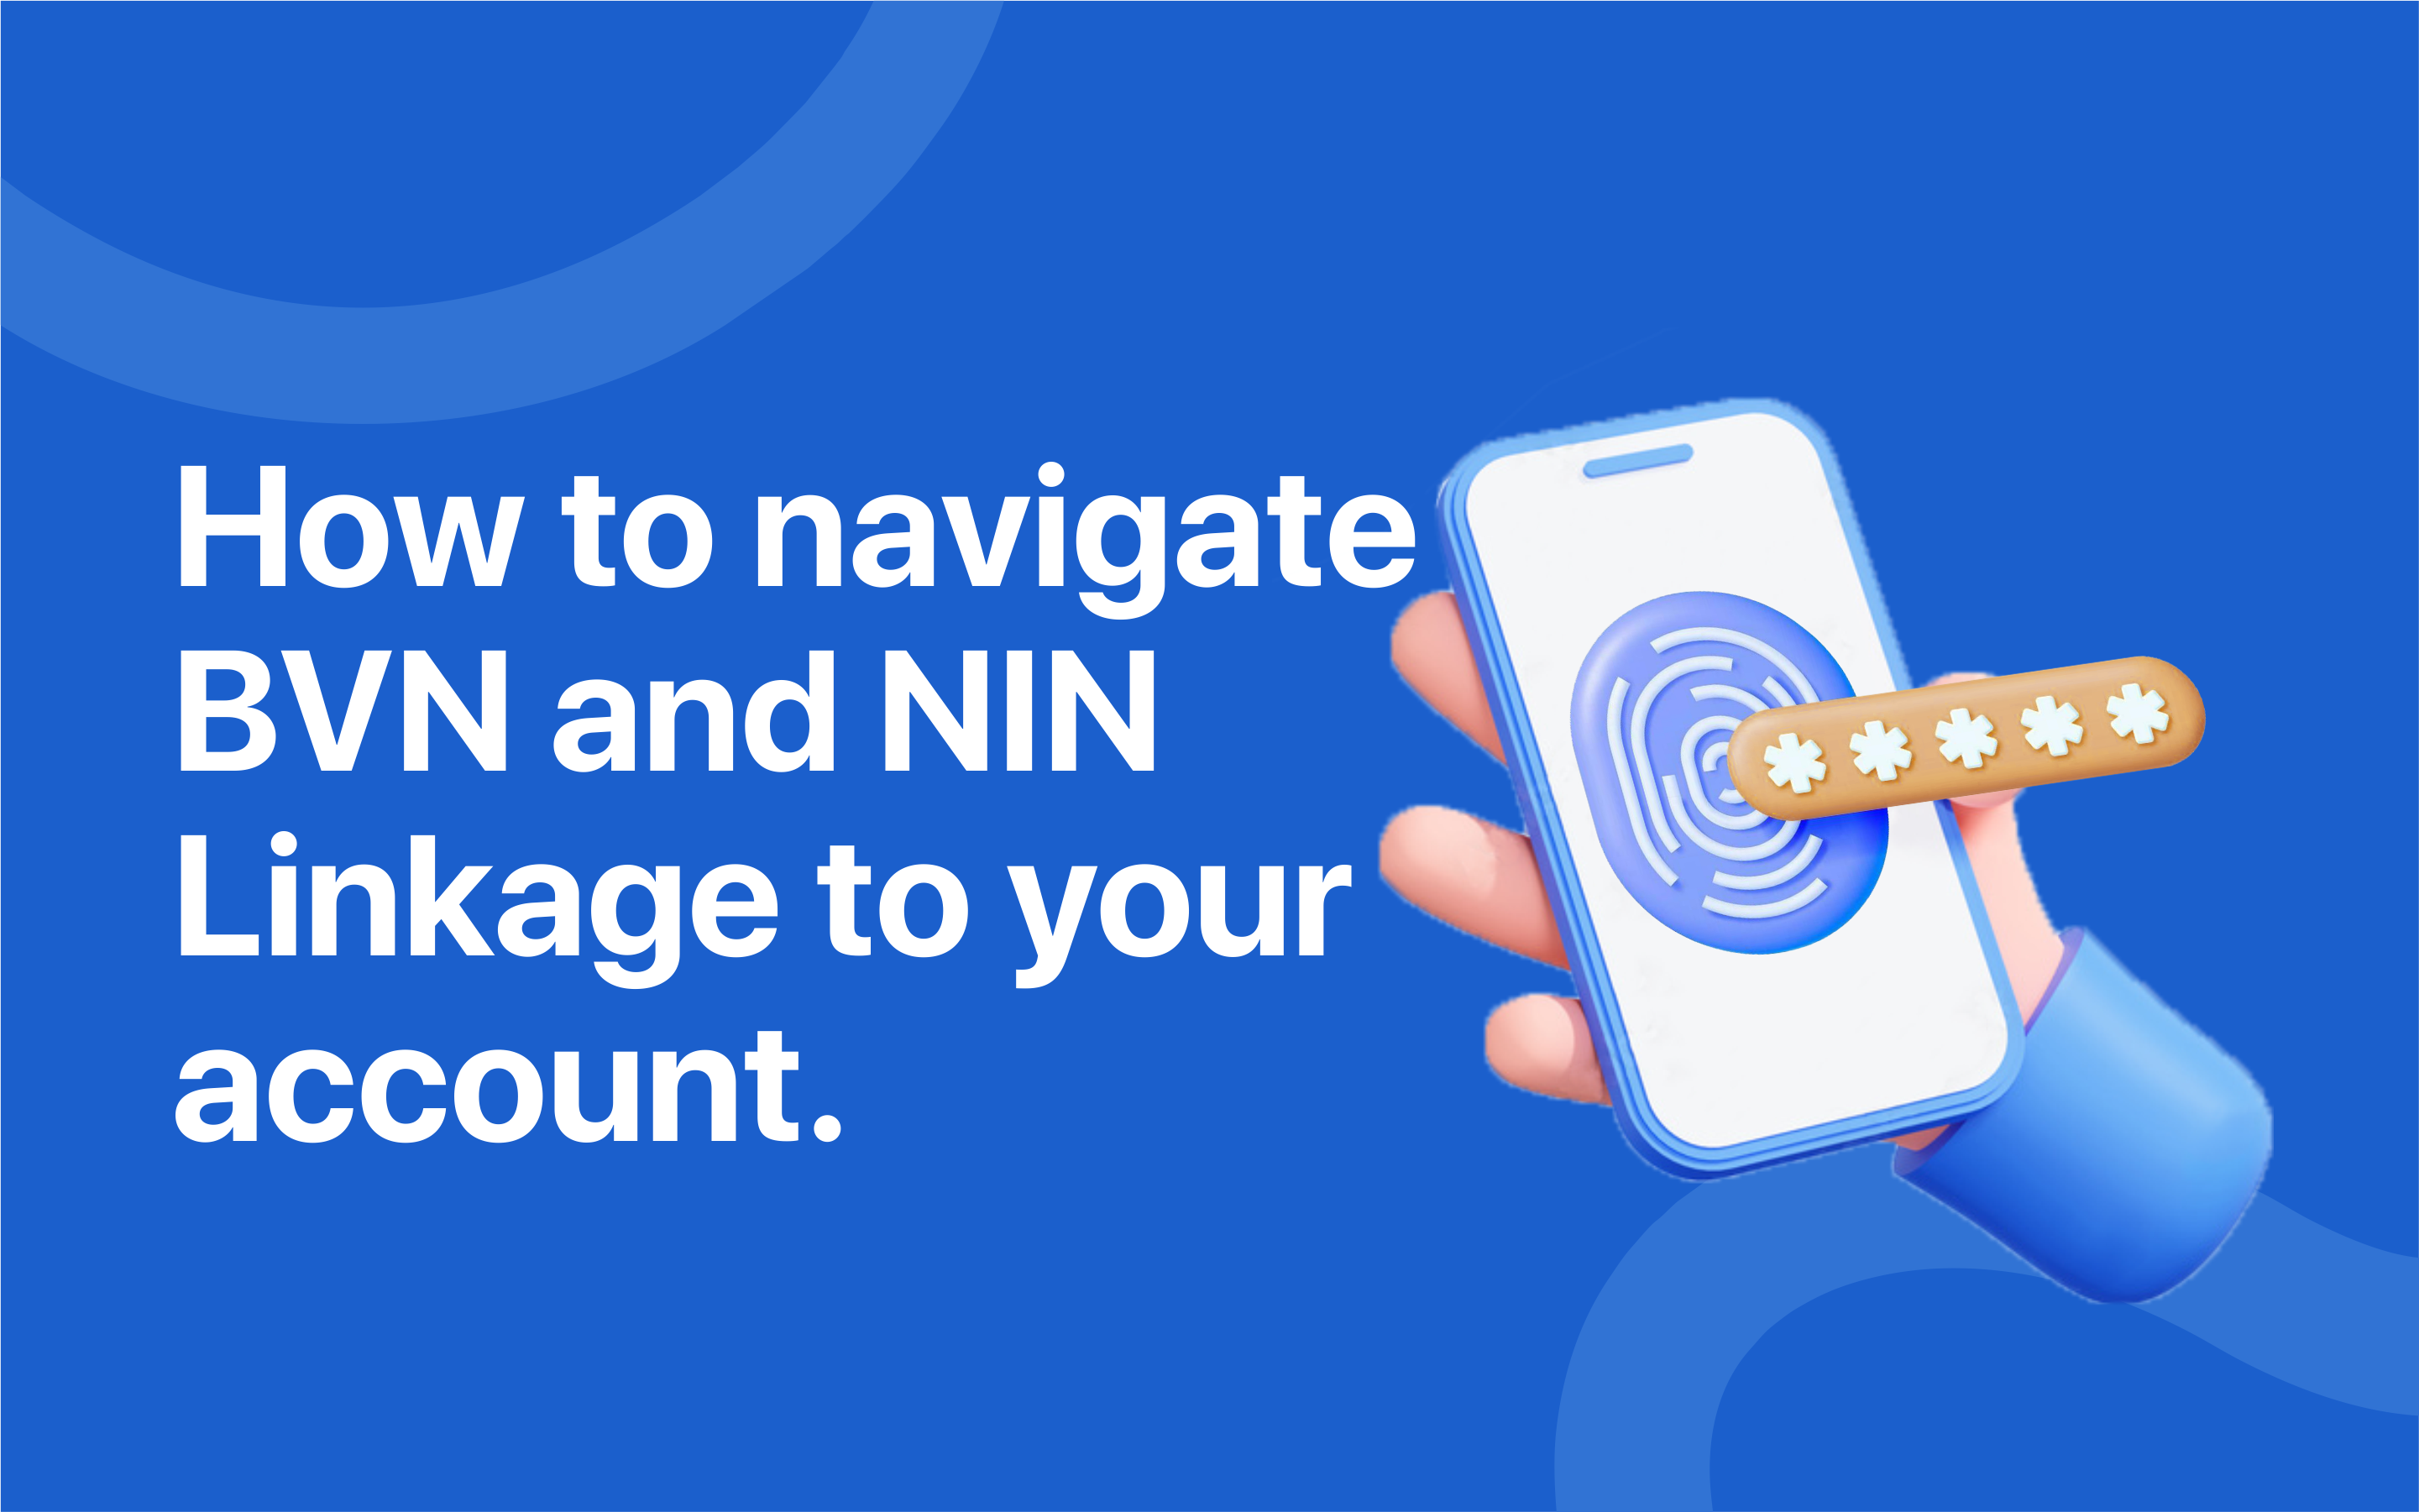 How to navigate BVN and NIN Linkage to your bank account